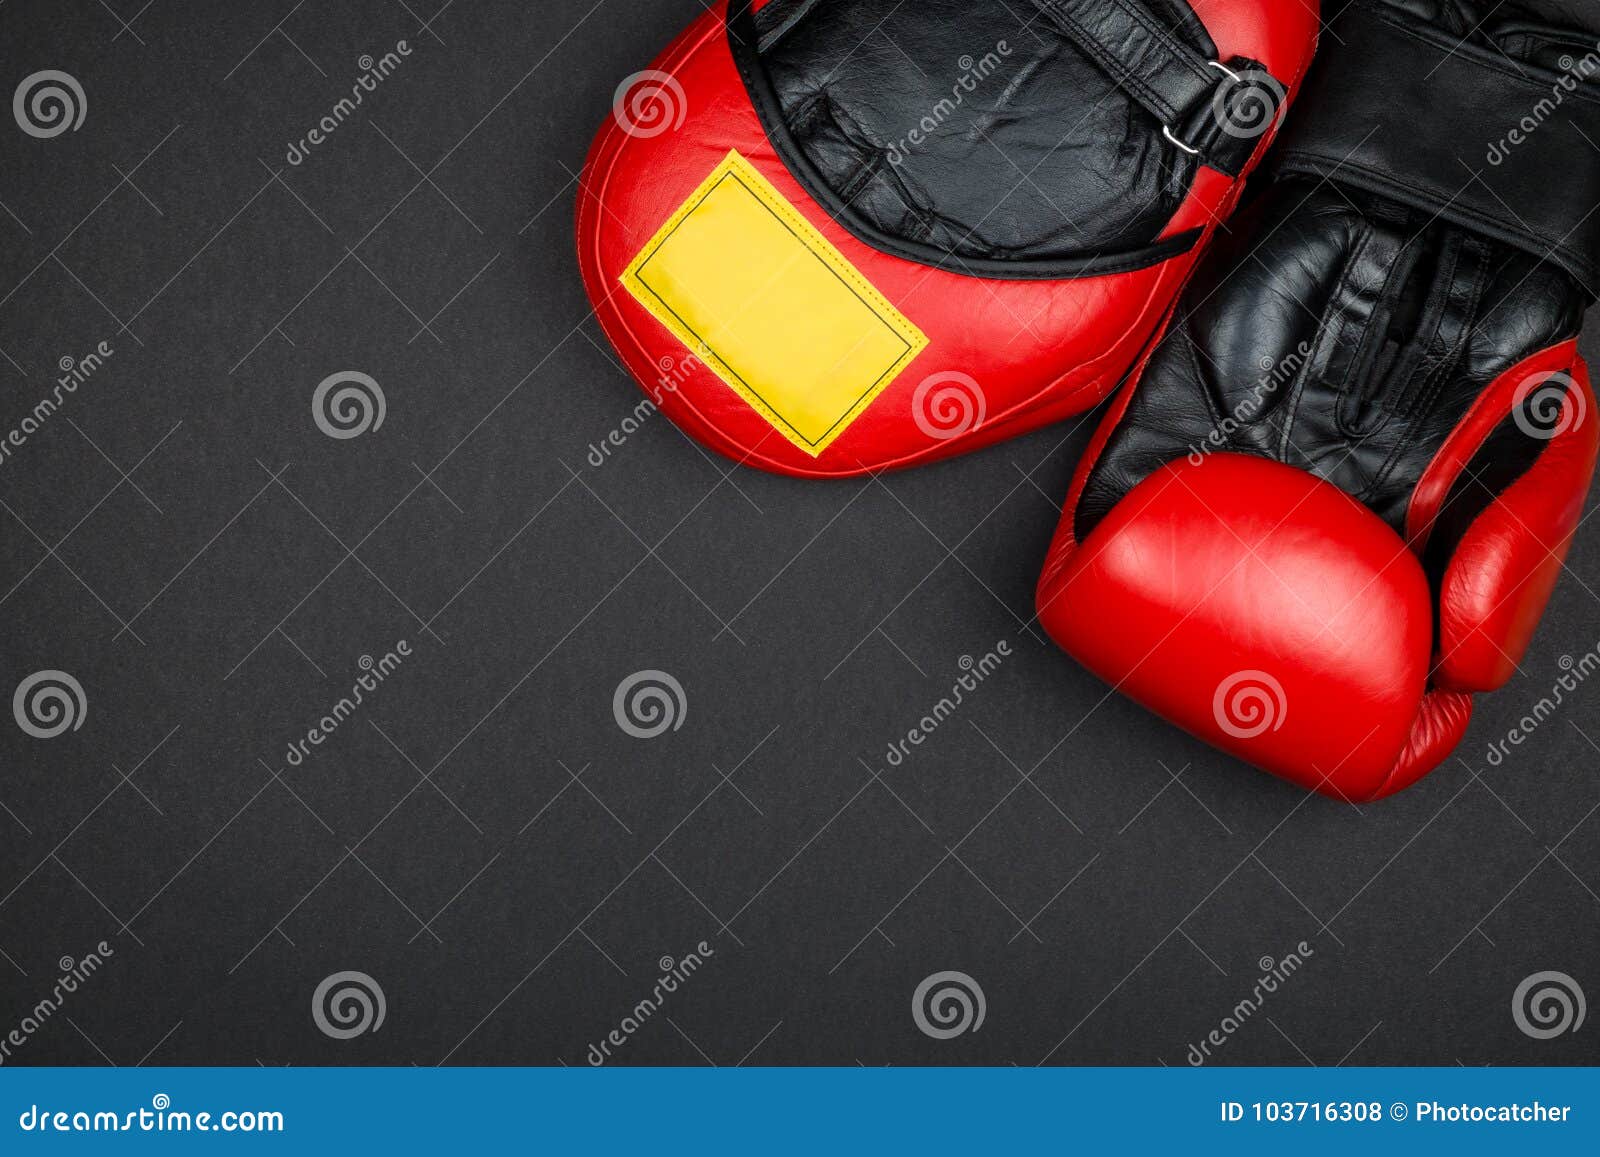 https://thumbs.dreamstime.com/z/one-red-leather-boxing-glove-hook-pad-black-surface-red-boxing-equipment-103716308.jpg